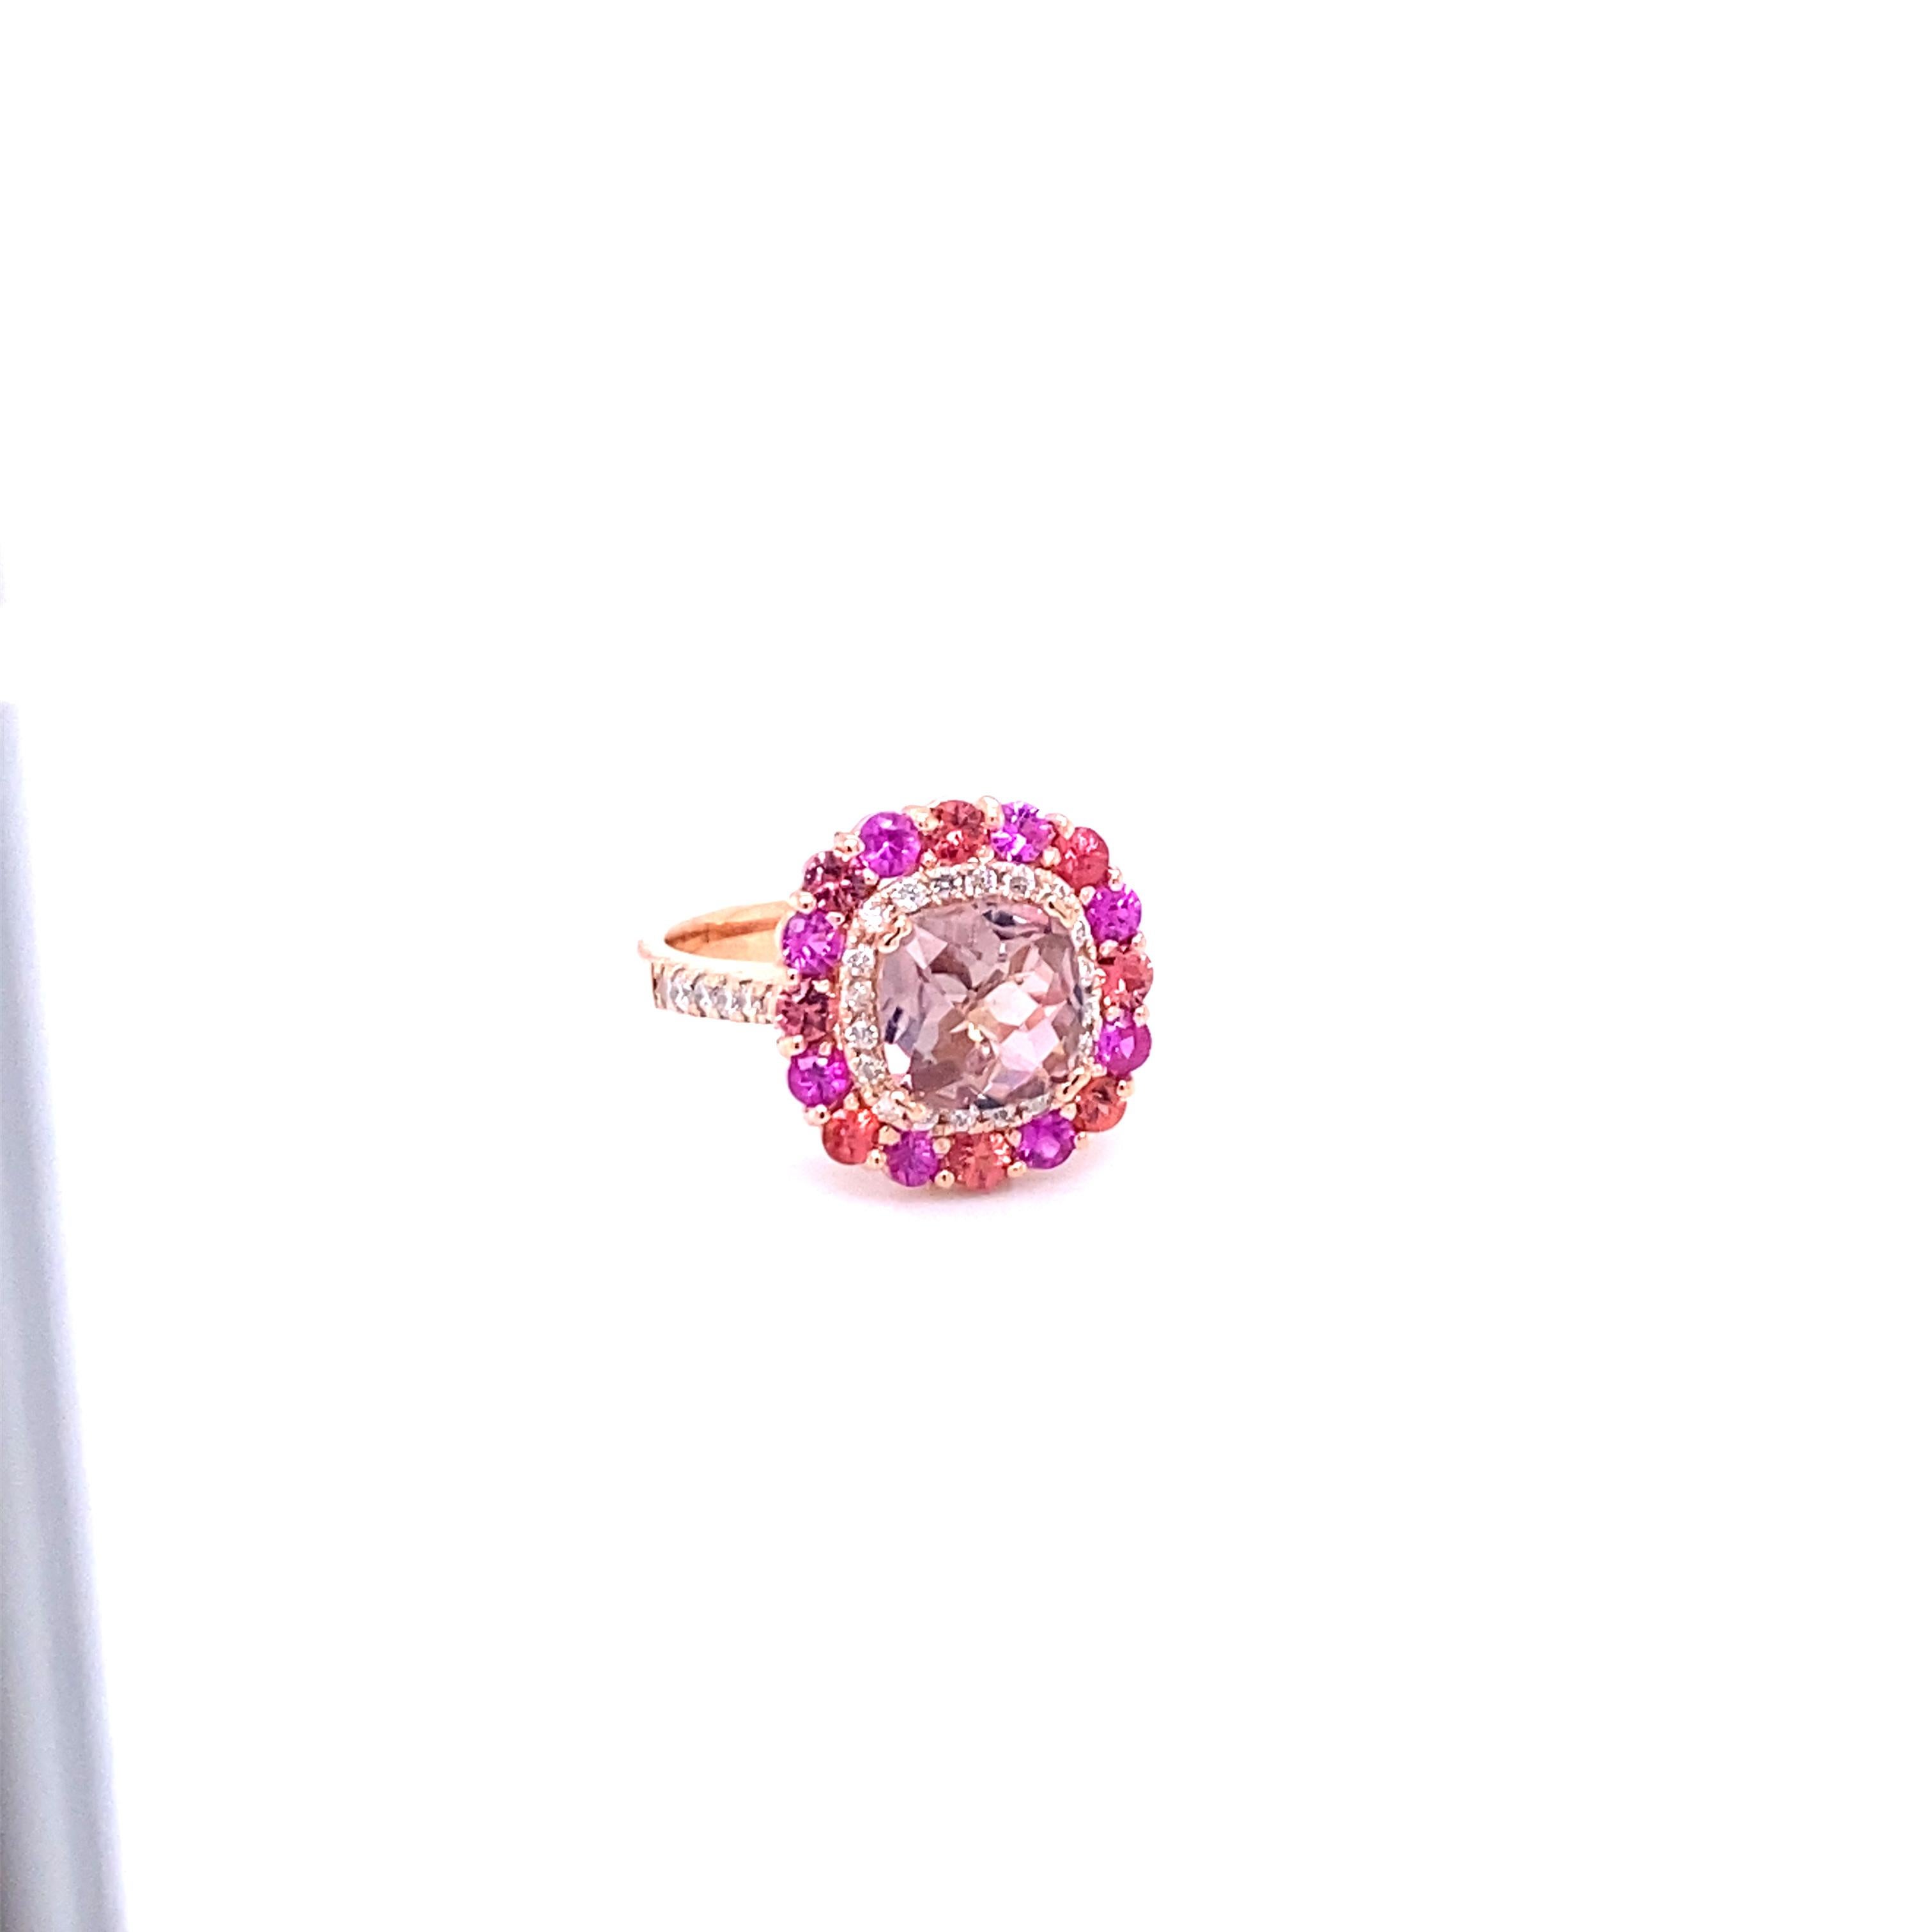 Pink Tourmaline Sapphire Diamond Rose Gold Statement Ring

This Ring has a Cushion Checkered Cut Tourmaline that weighs 1.72 carats and 16 Multi Sapphires that weigh 1.04 Carats. There are also 32 Round Cut Diamonds that weigh 0.35 Carats.  The